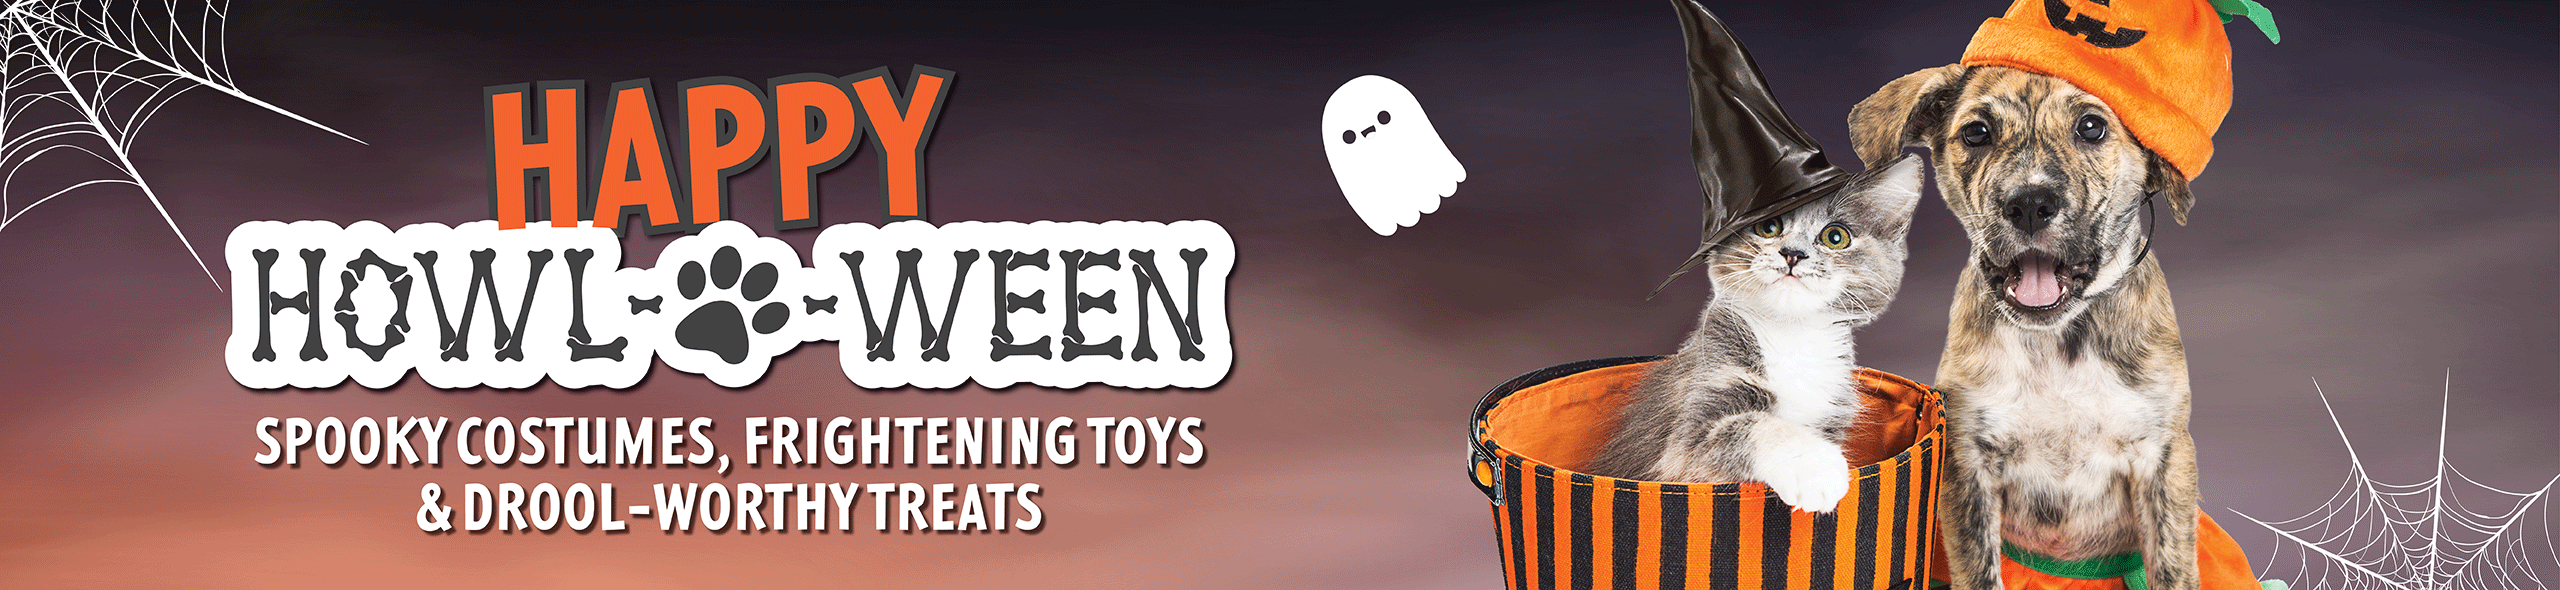 Happy Halloween! Spooky Costumes, Frightening Toys, and Drool-Worthy Treats